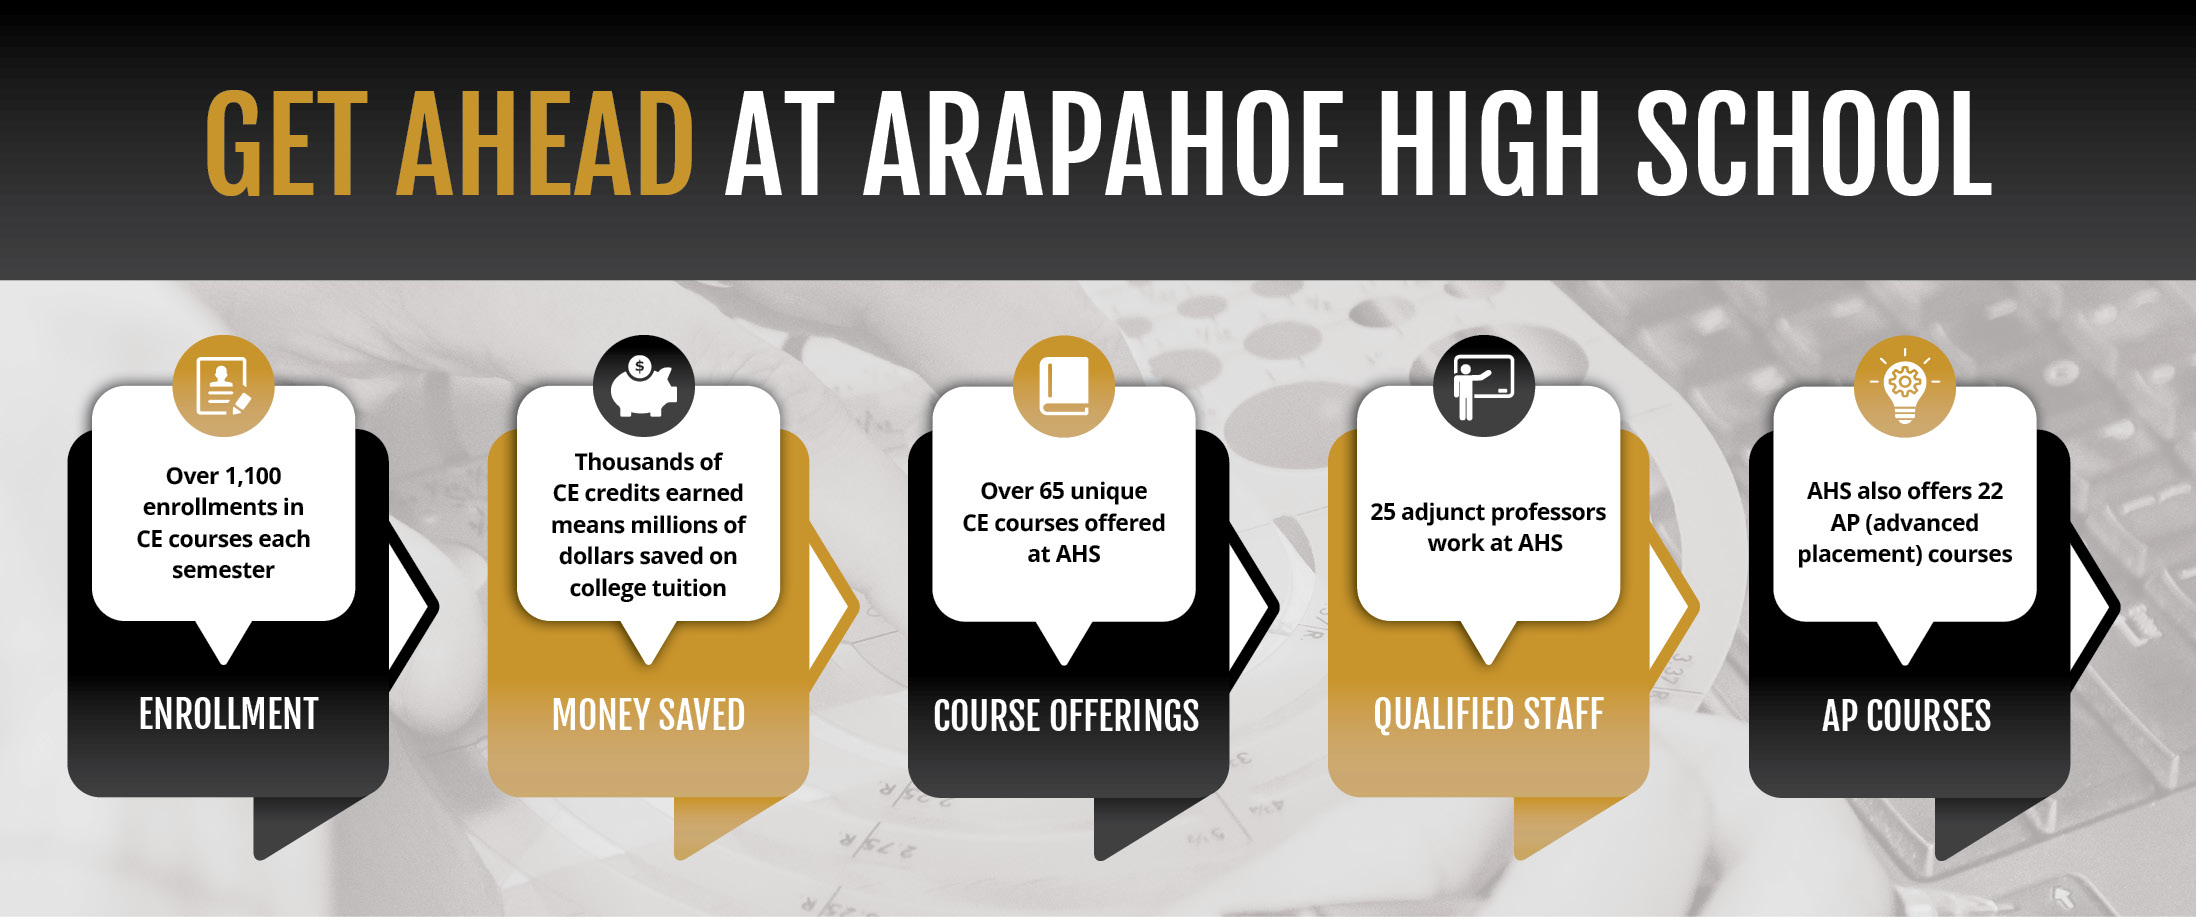 GET AHEAD AT ARAPAHOE HIGH SCHOOL  • Over 1000 enrollments in CE courses each semester • Over 65 unique CE Courses offered at AHS •Thousands of CE Credits Earned means millions of dollars saved on college tuition • 25 adjunct professors work at AHS •AHS also offer 22 AP (advanced placement) courses